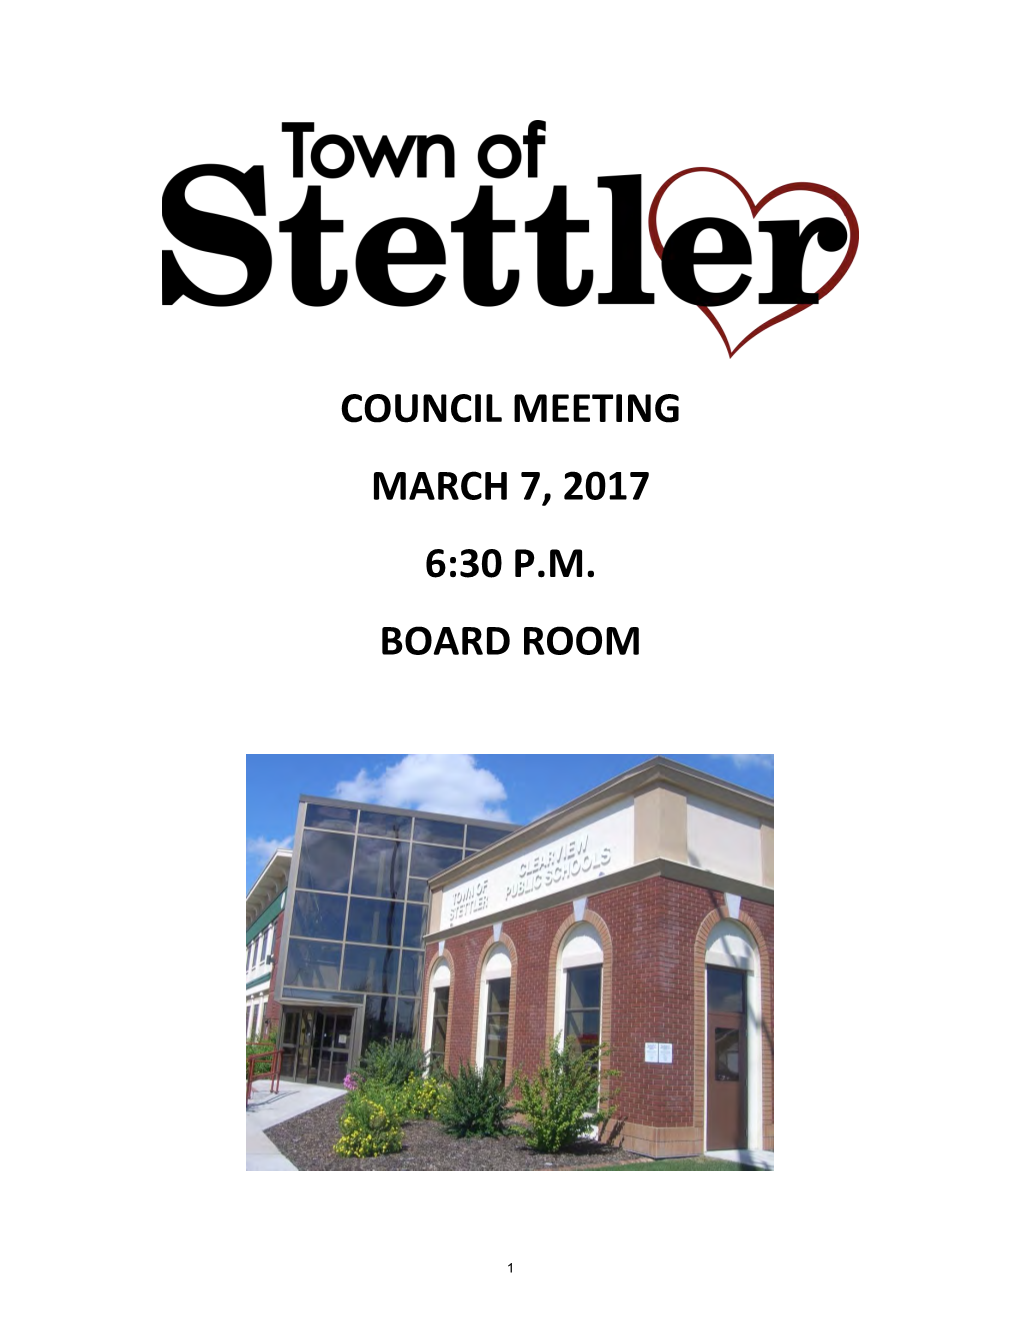 Council Meeting March 7, 2017 6:30 P.M. Board Room